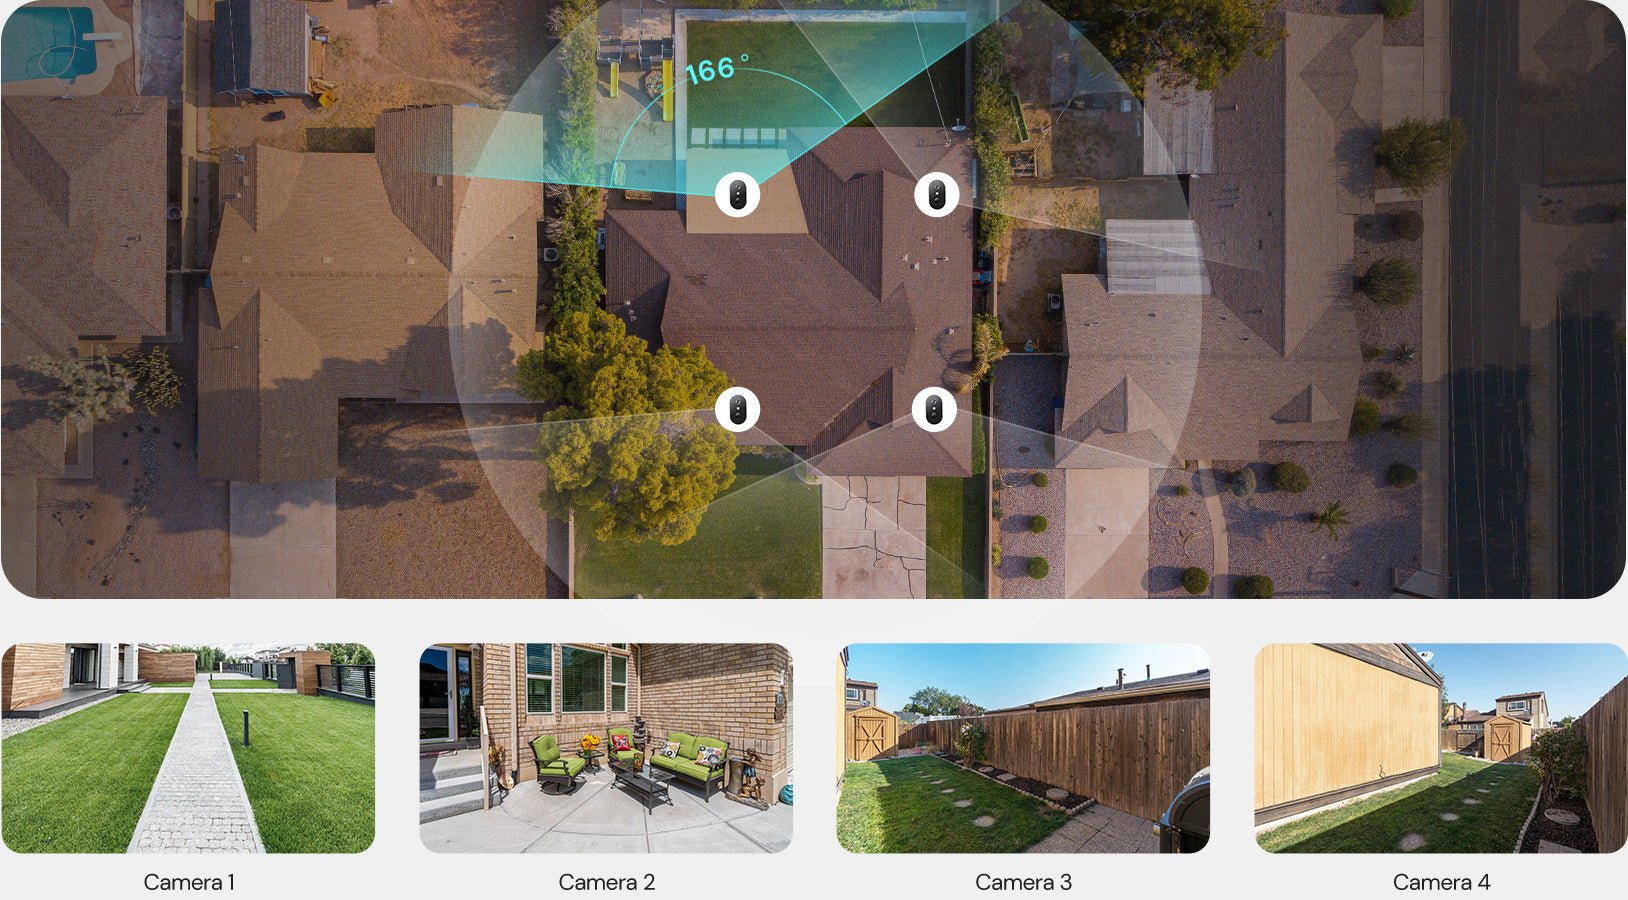 Cover Every Corner - Live view up to 4 solar security cameras at once on a single screen, providing you with unparalleled visibility and control over your property.